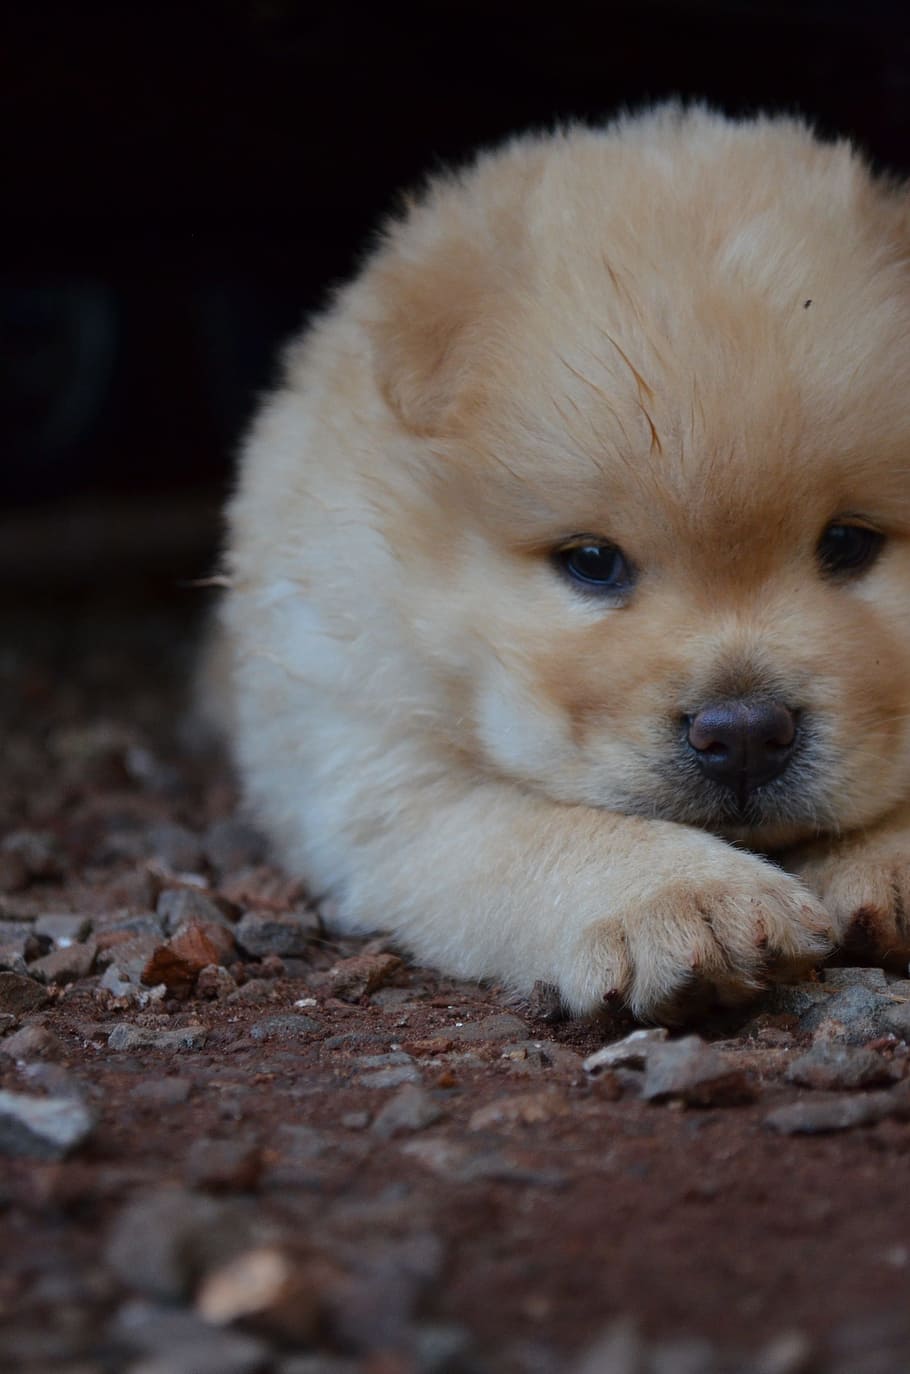 brown chow chow puppy lying on ground close-up photo, Puppy, Chow